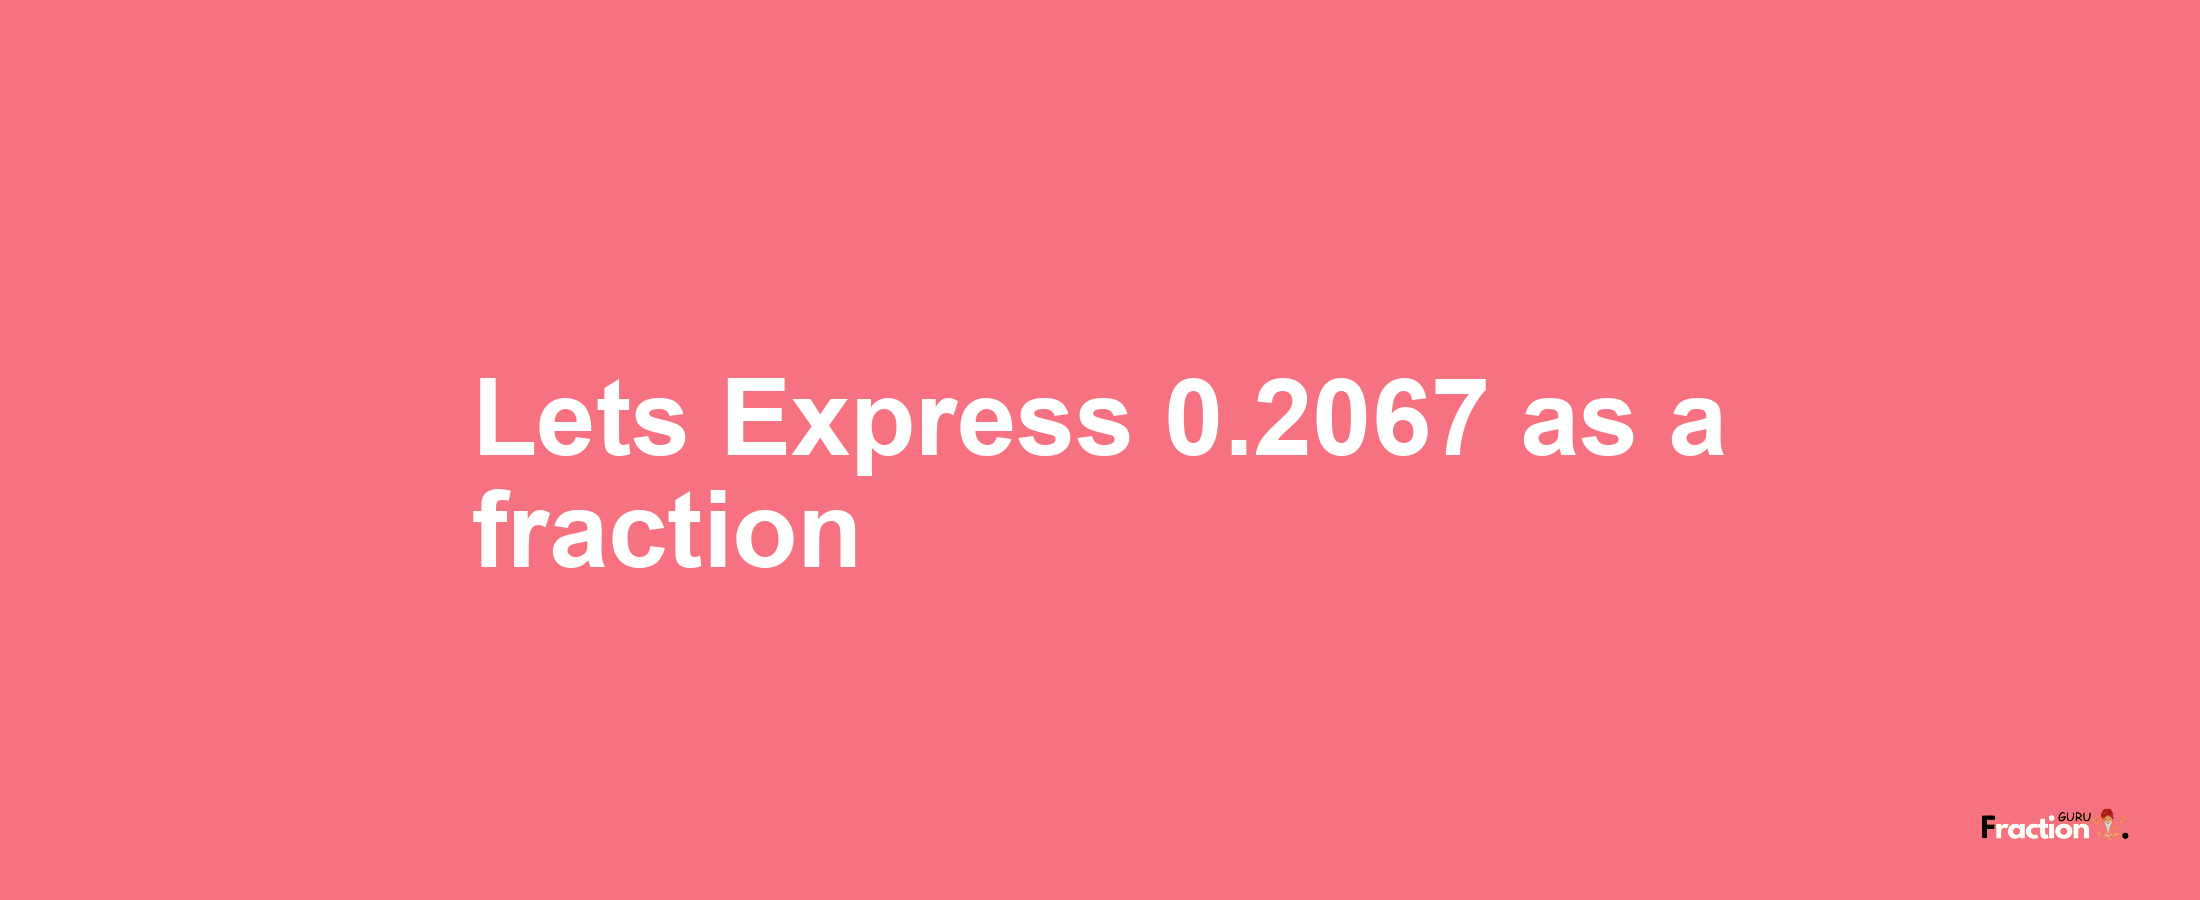 Lets Express 0.2067 as afraction